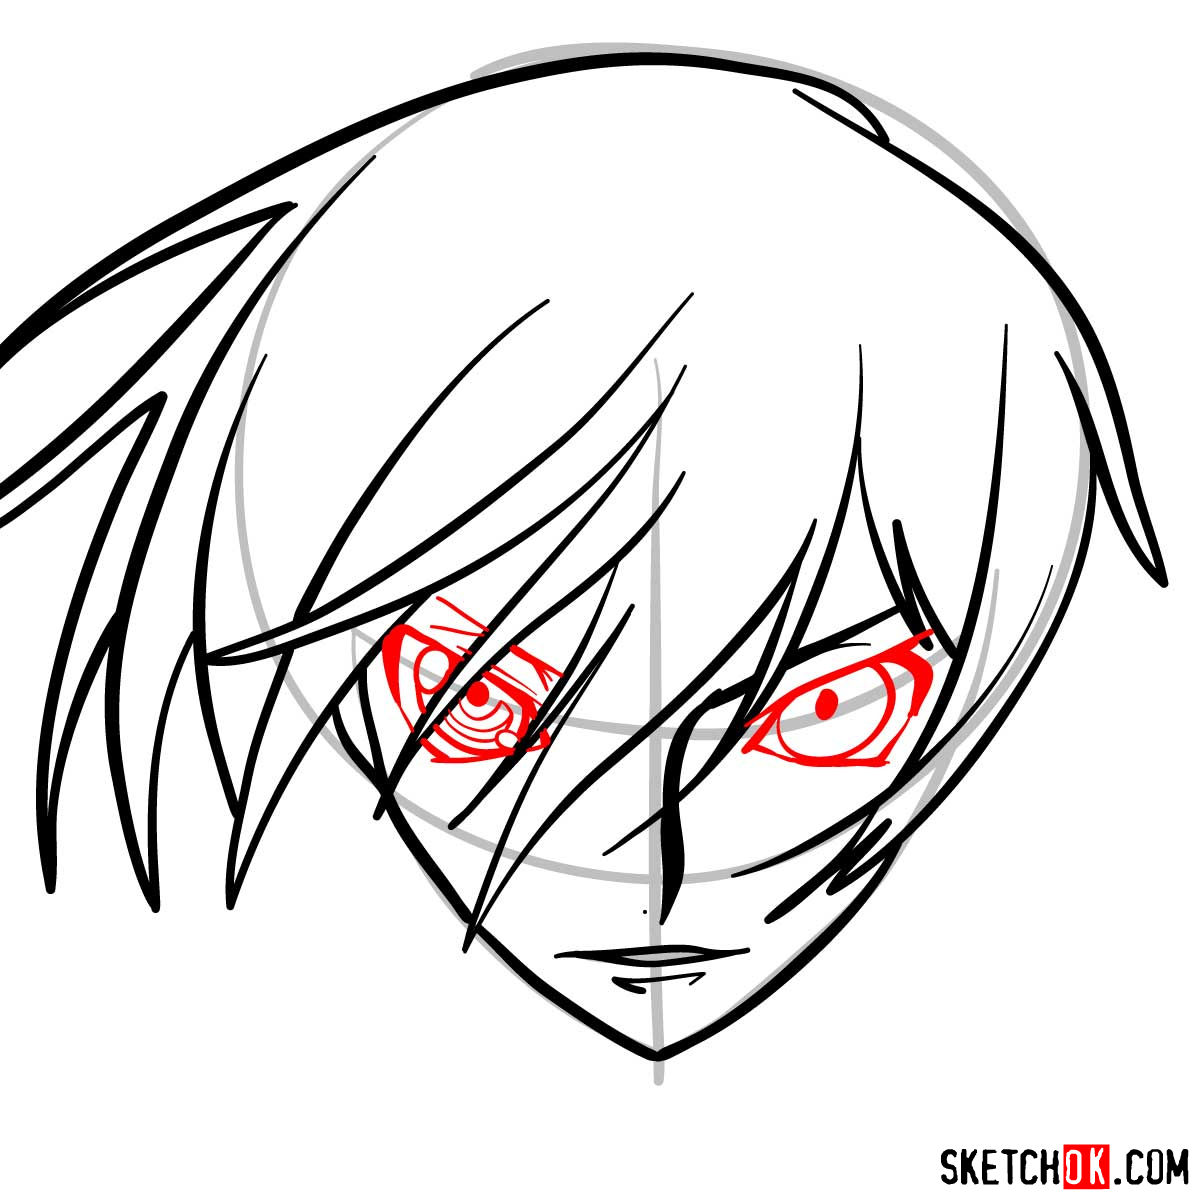 How to draw the face of Lelouch vi Britannia | Code Geass anime - step 05